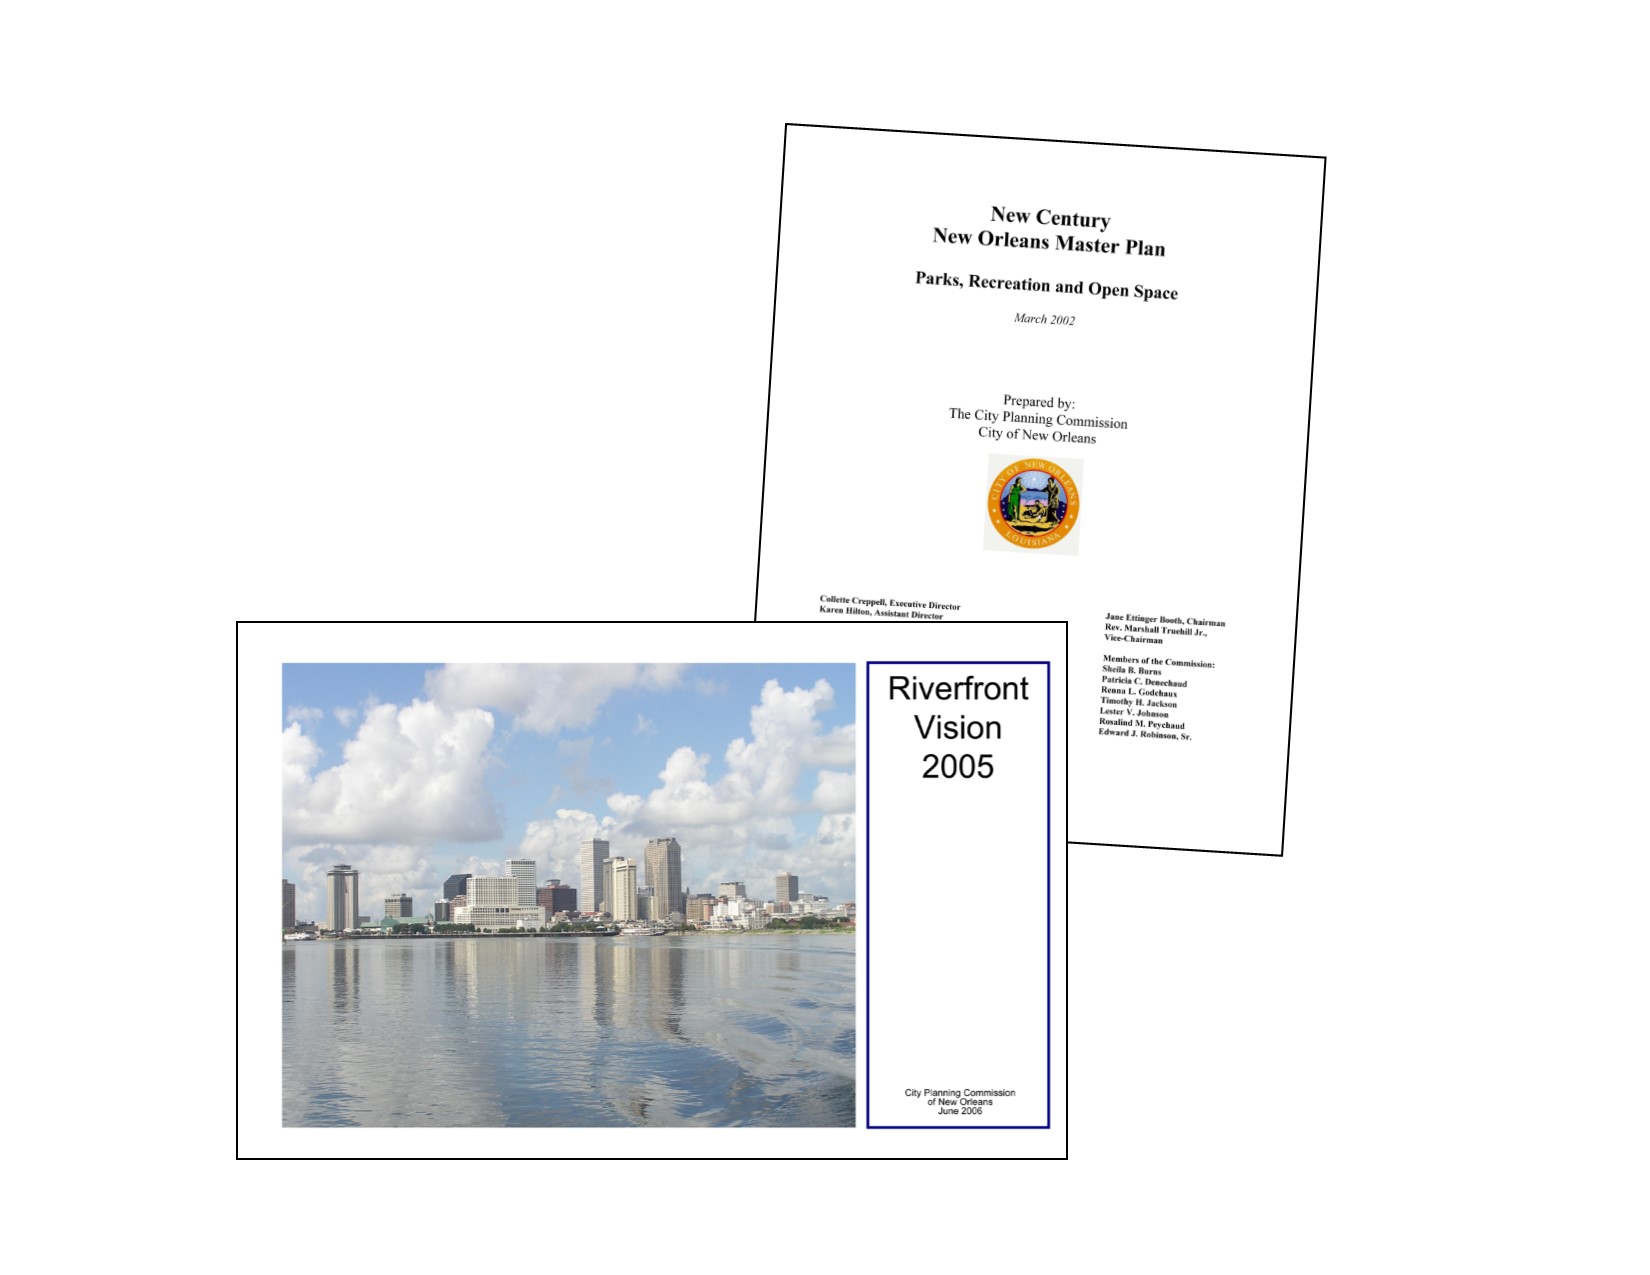 Photo; New Century New Orleans Master Plan Cover